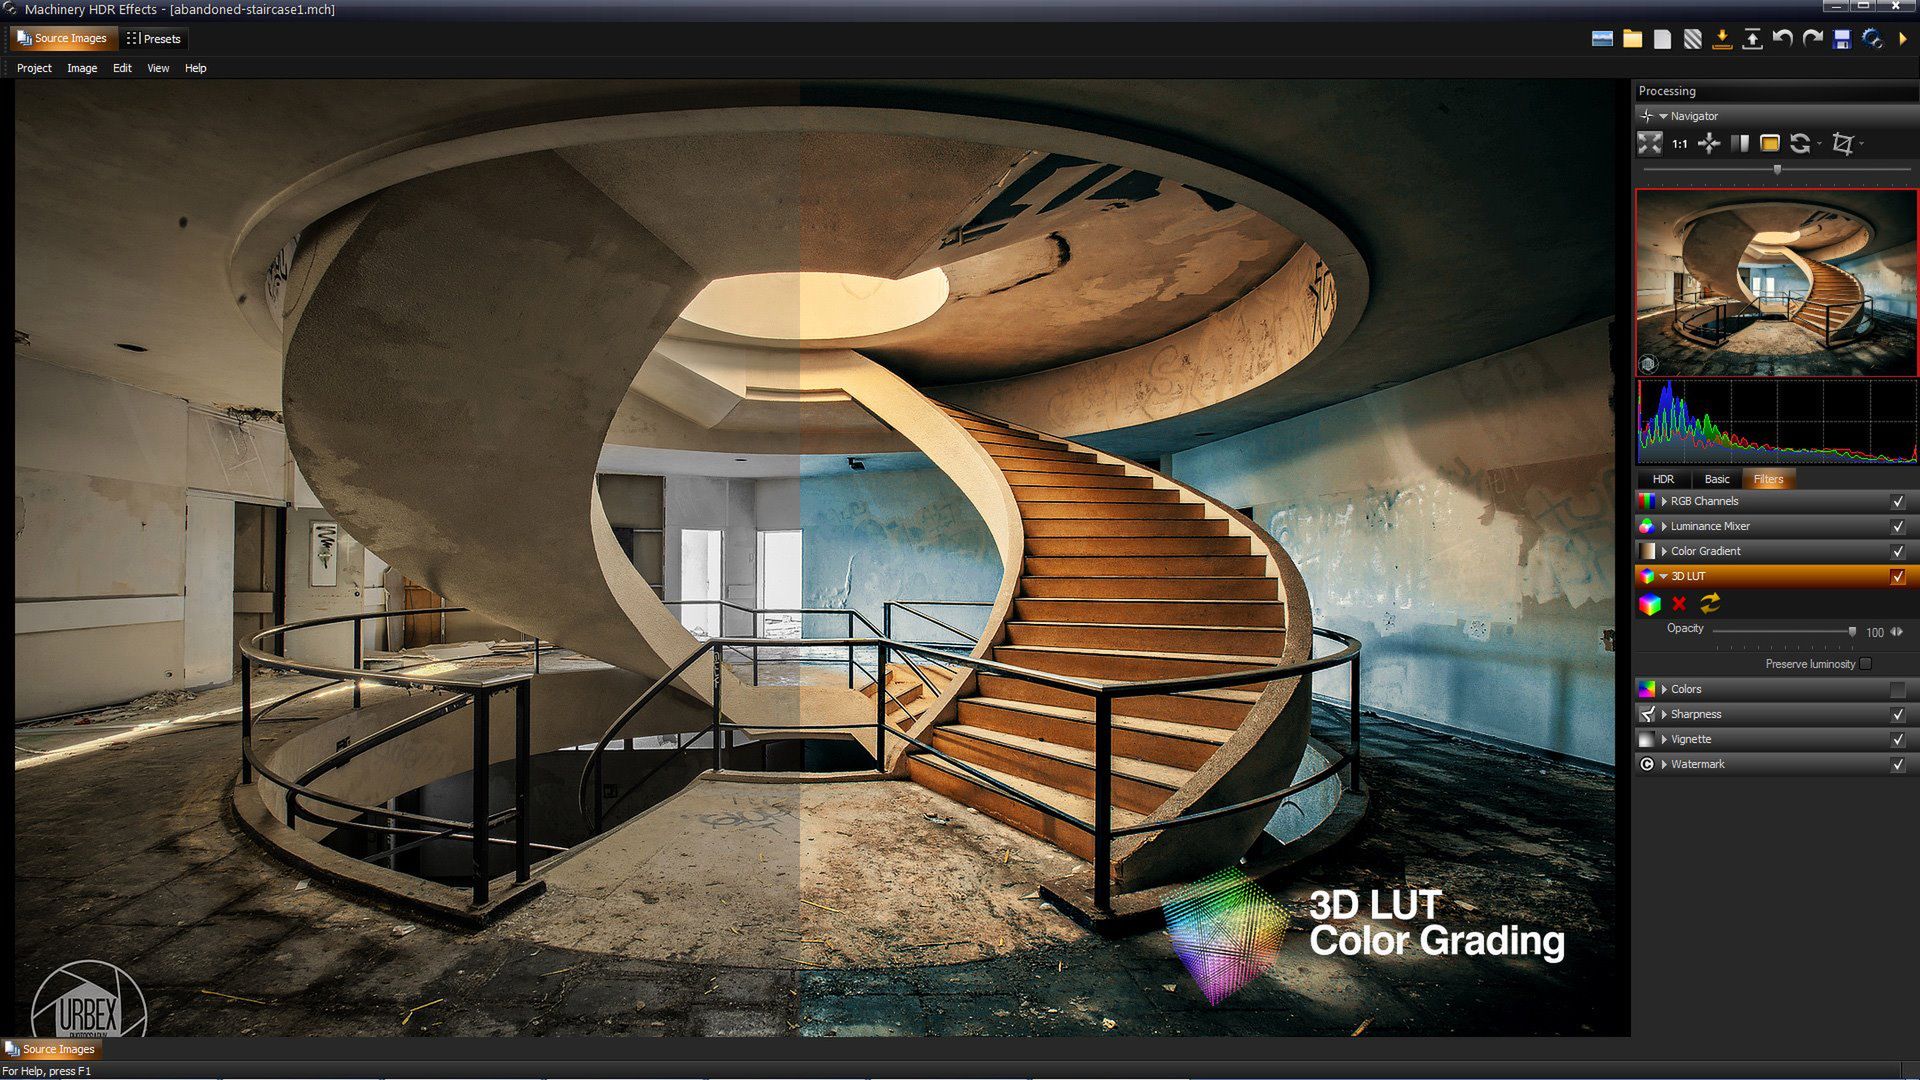 Machinery HDR Effects 3.1.4 for windows download free